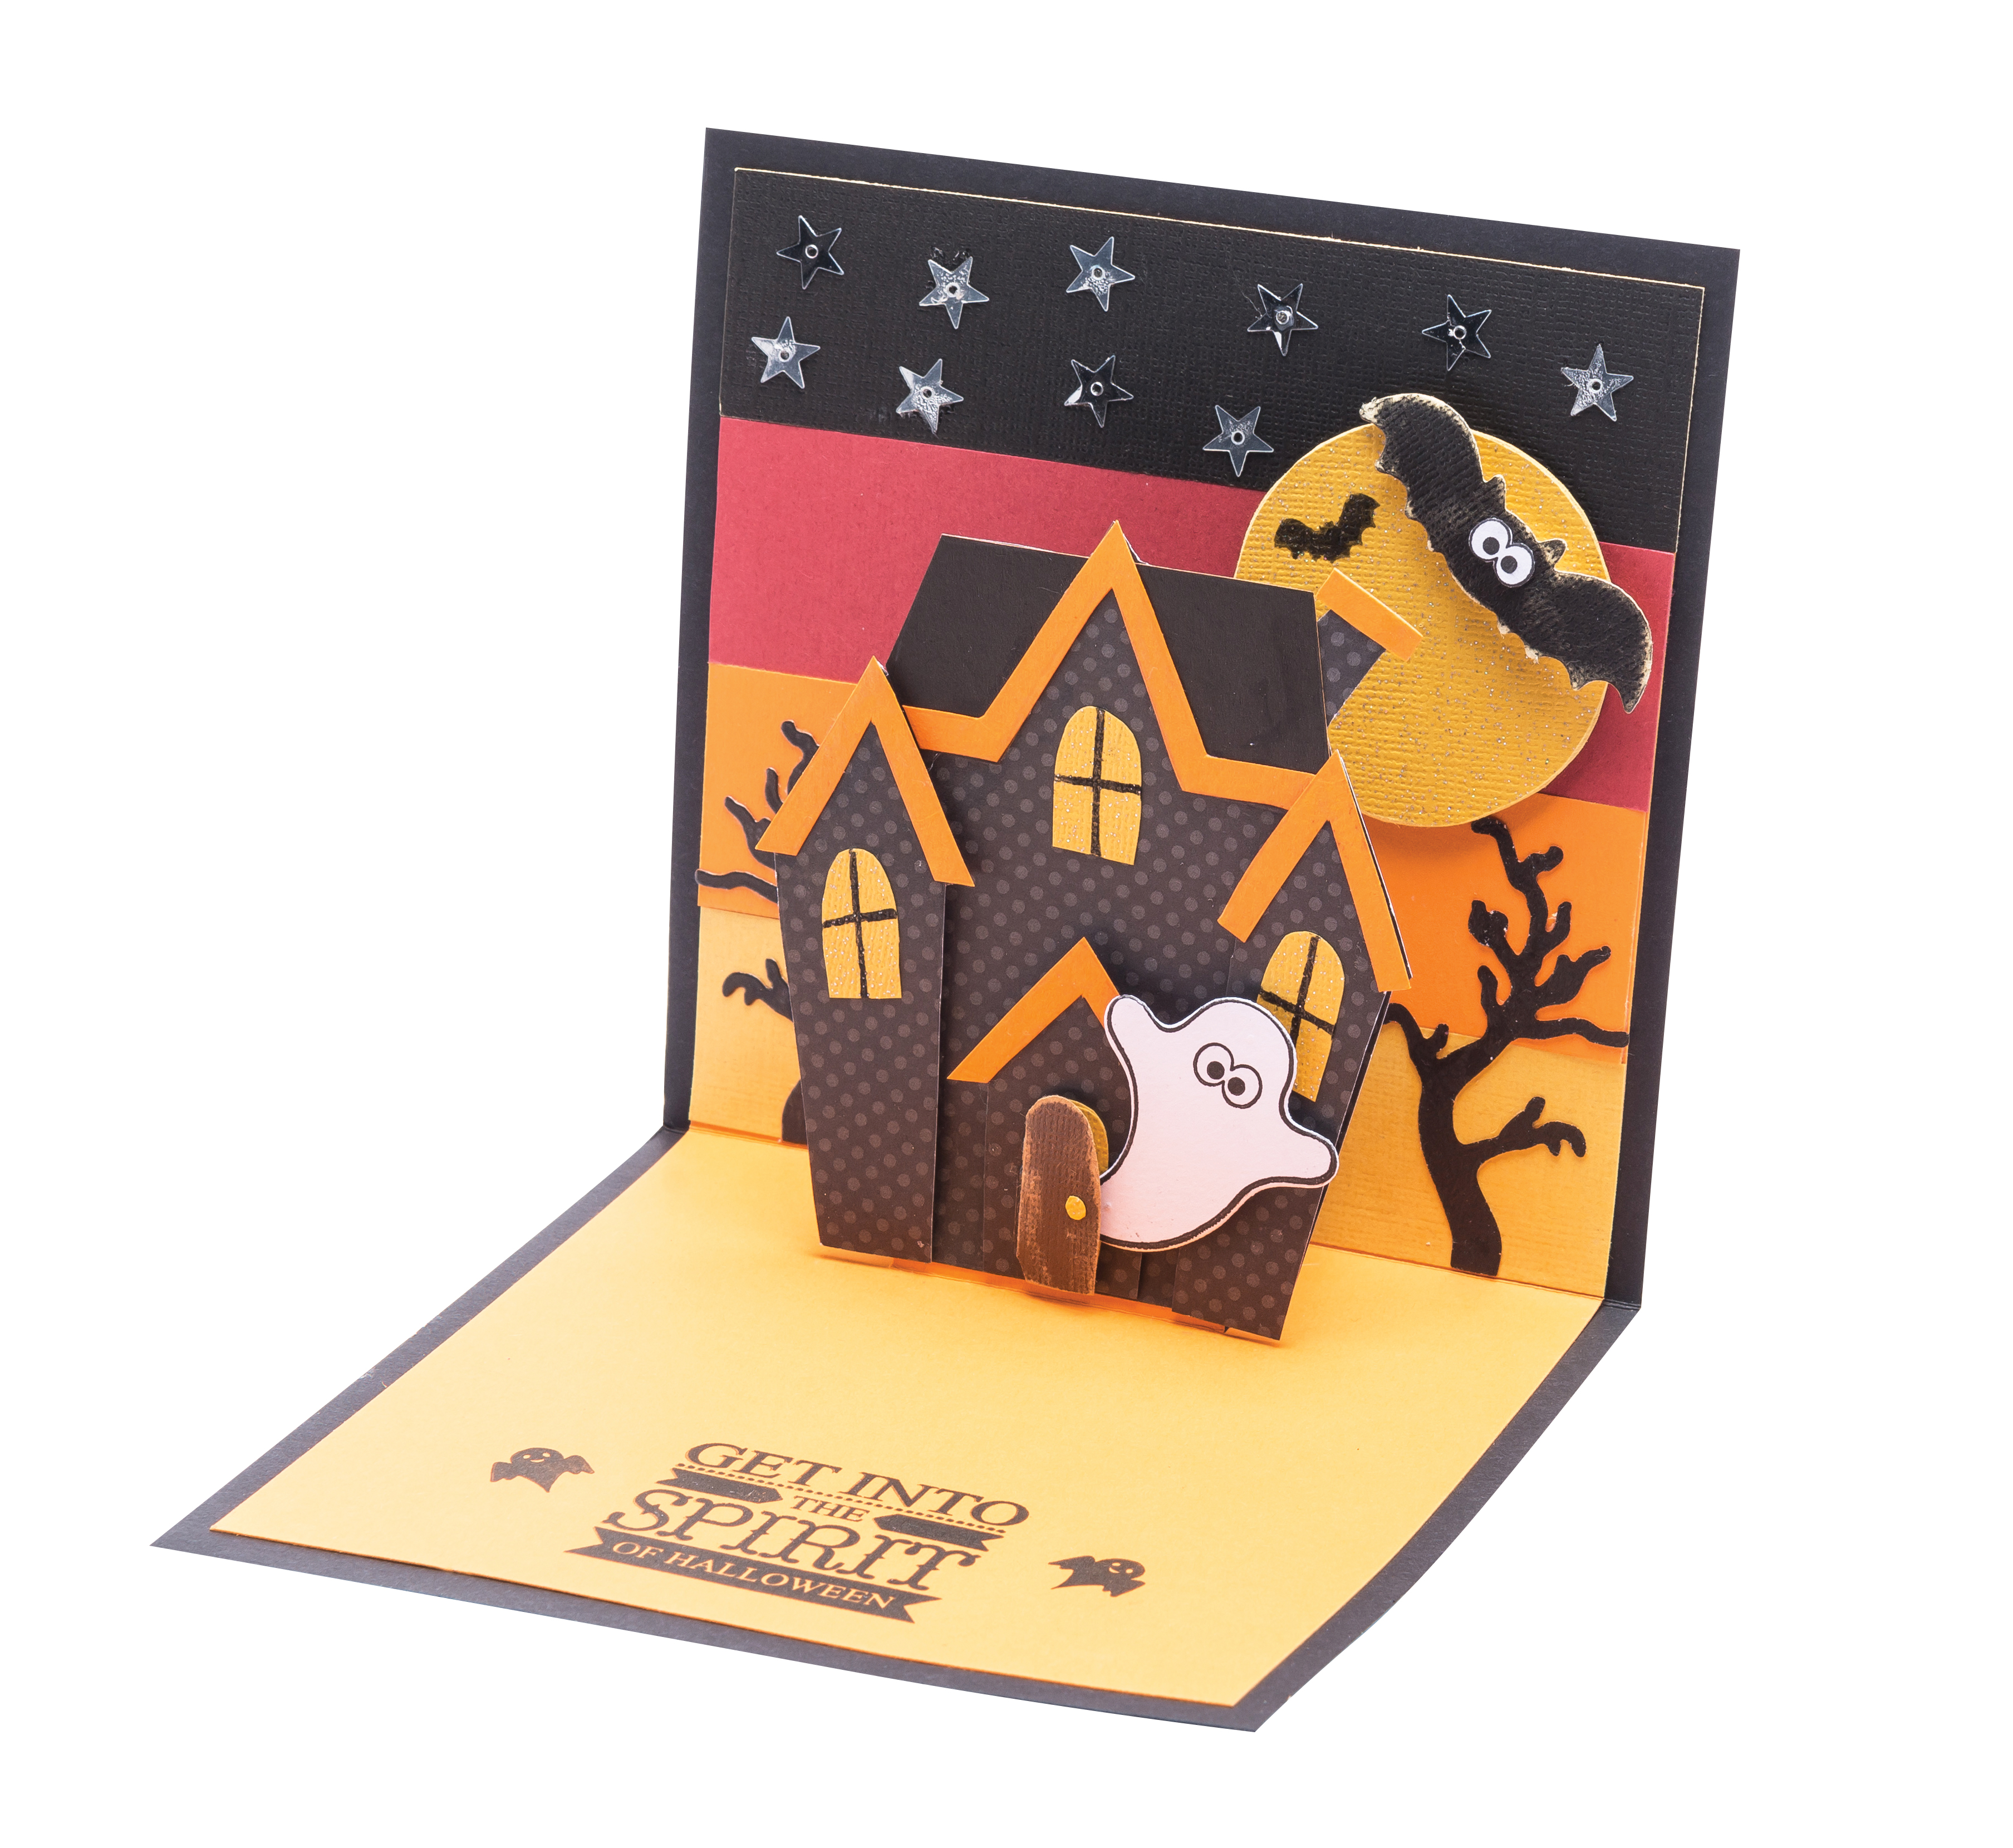 Haunted house papercraft card